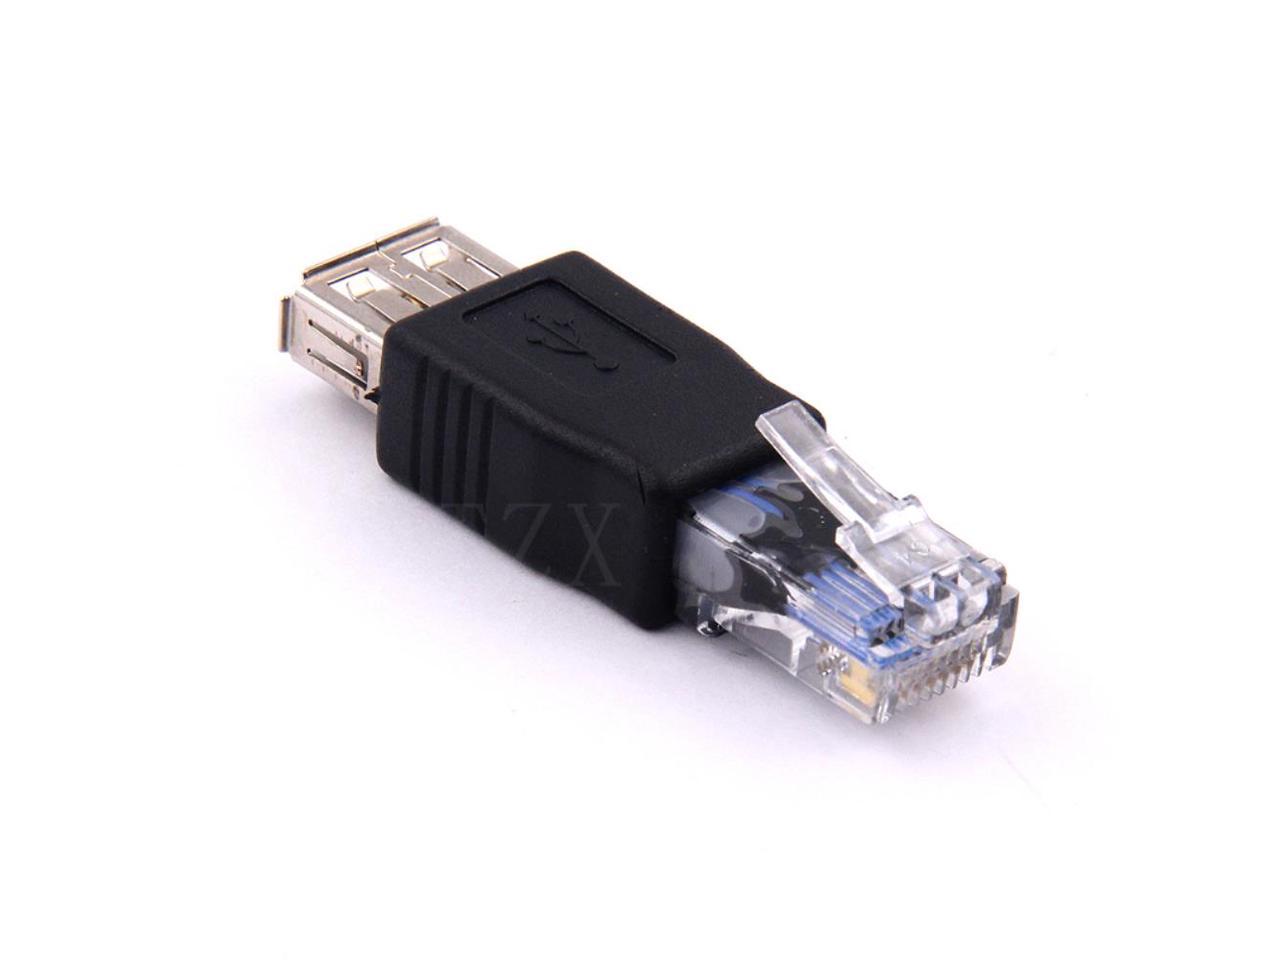 Cable Length: Other Occus Yoton Crystal Head RJ45 USB A Female Adapter Connector Laptop Ethernet Converter Plug 